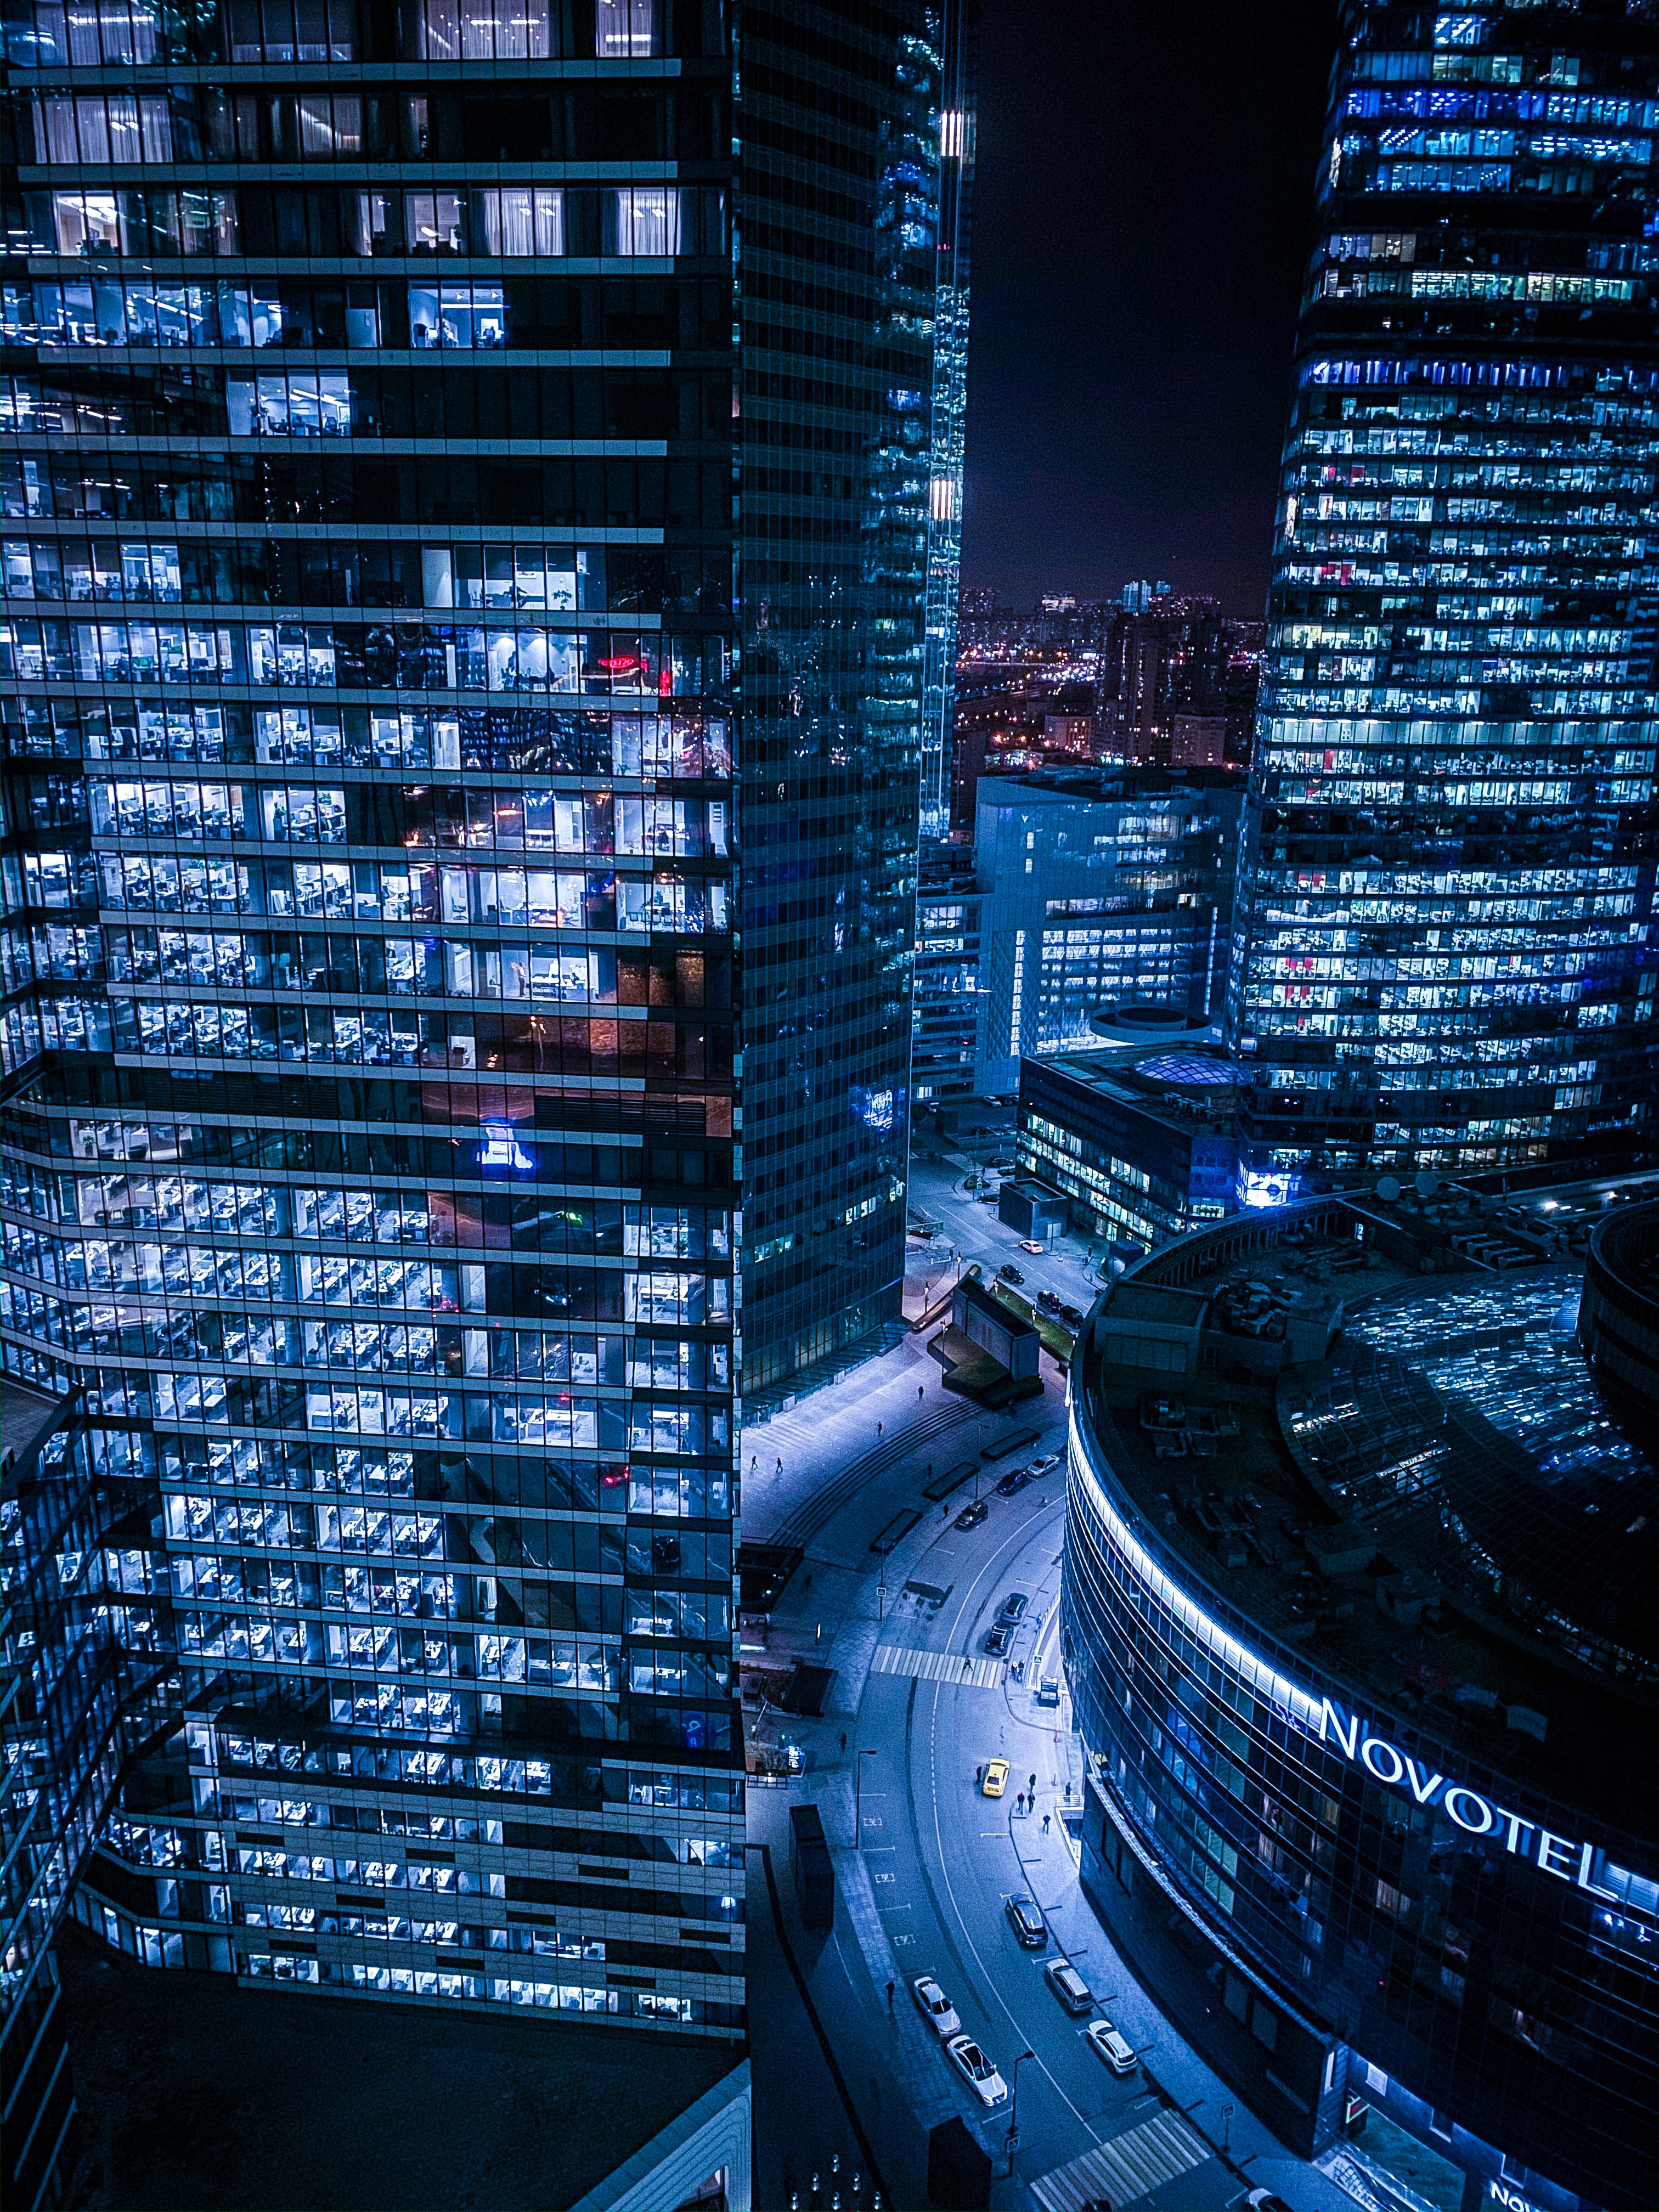 cities, architecture, building, lights, night city, skyscrapers